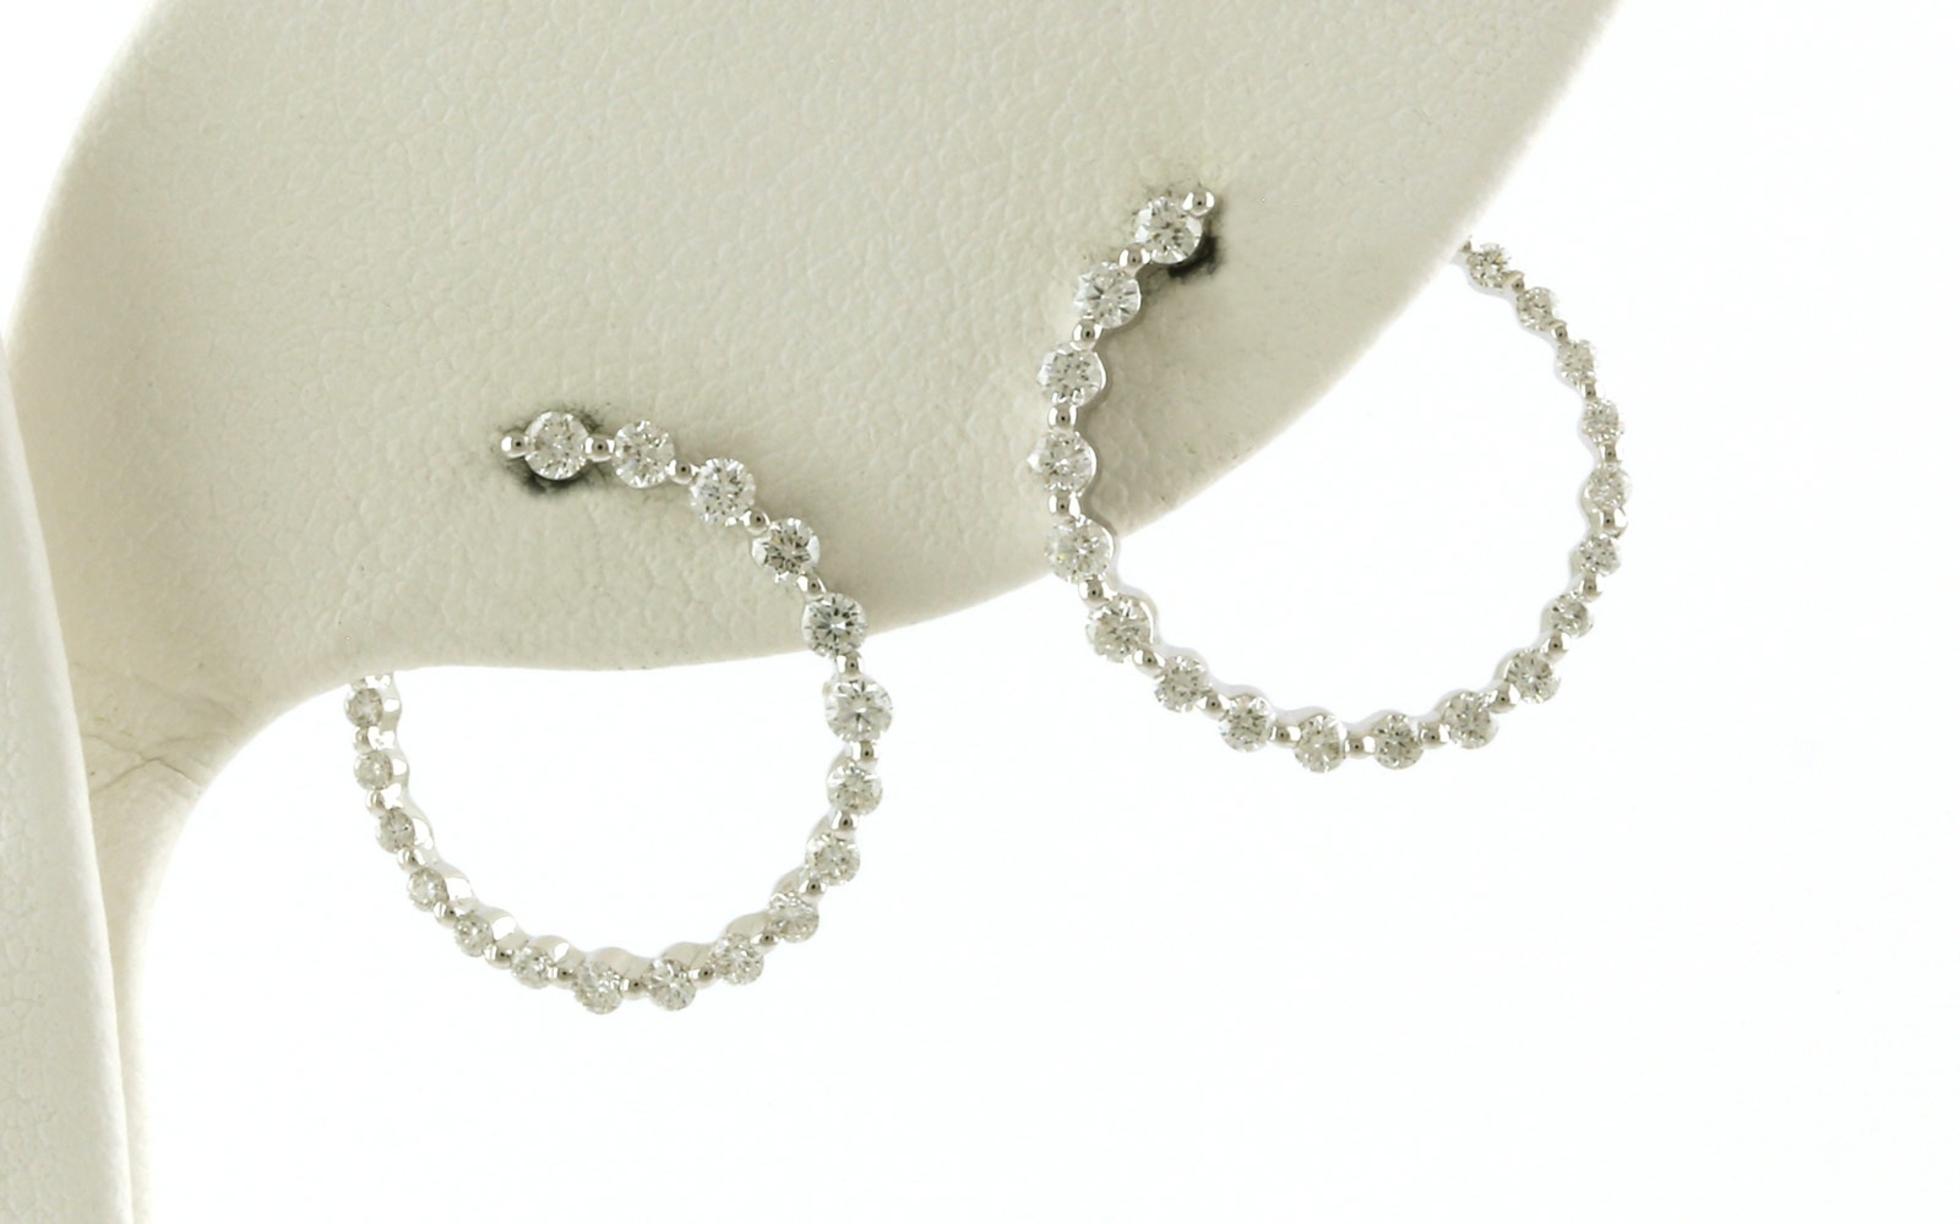 Curved Pave Diamond Stud Hoop Earrings in White Gold (0.50cts TWT)